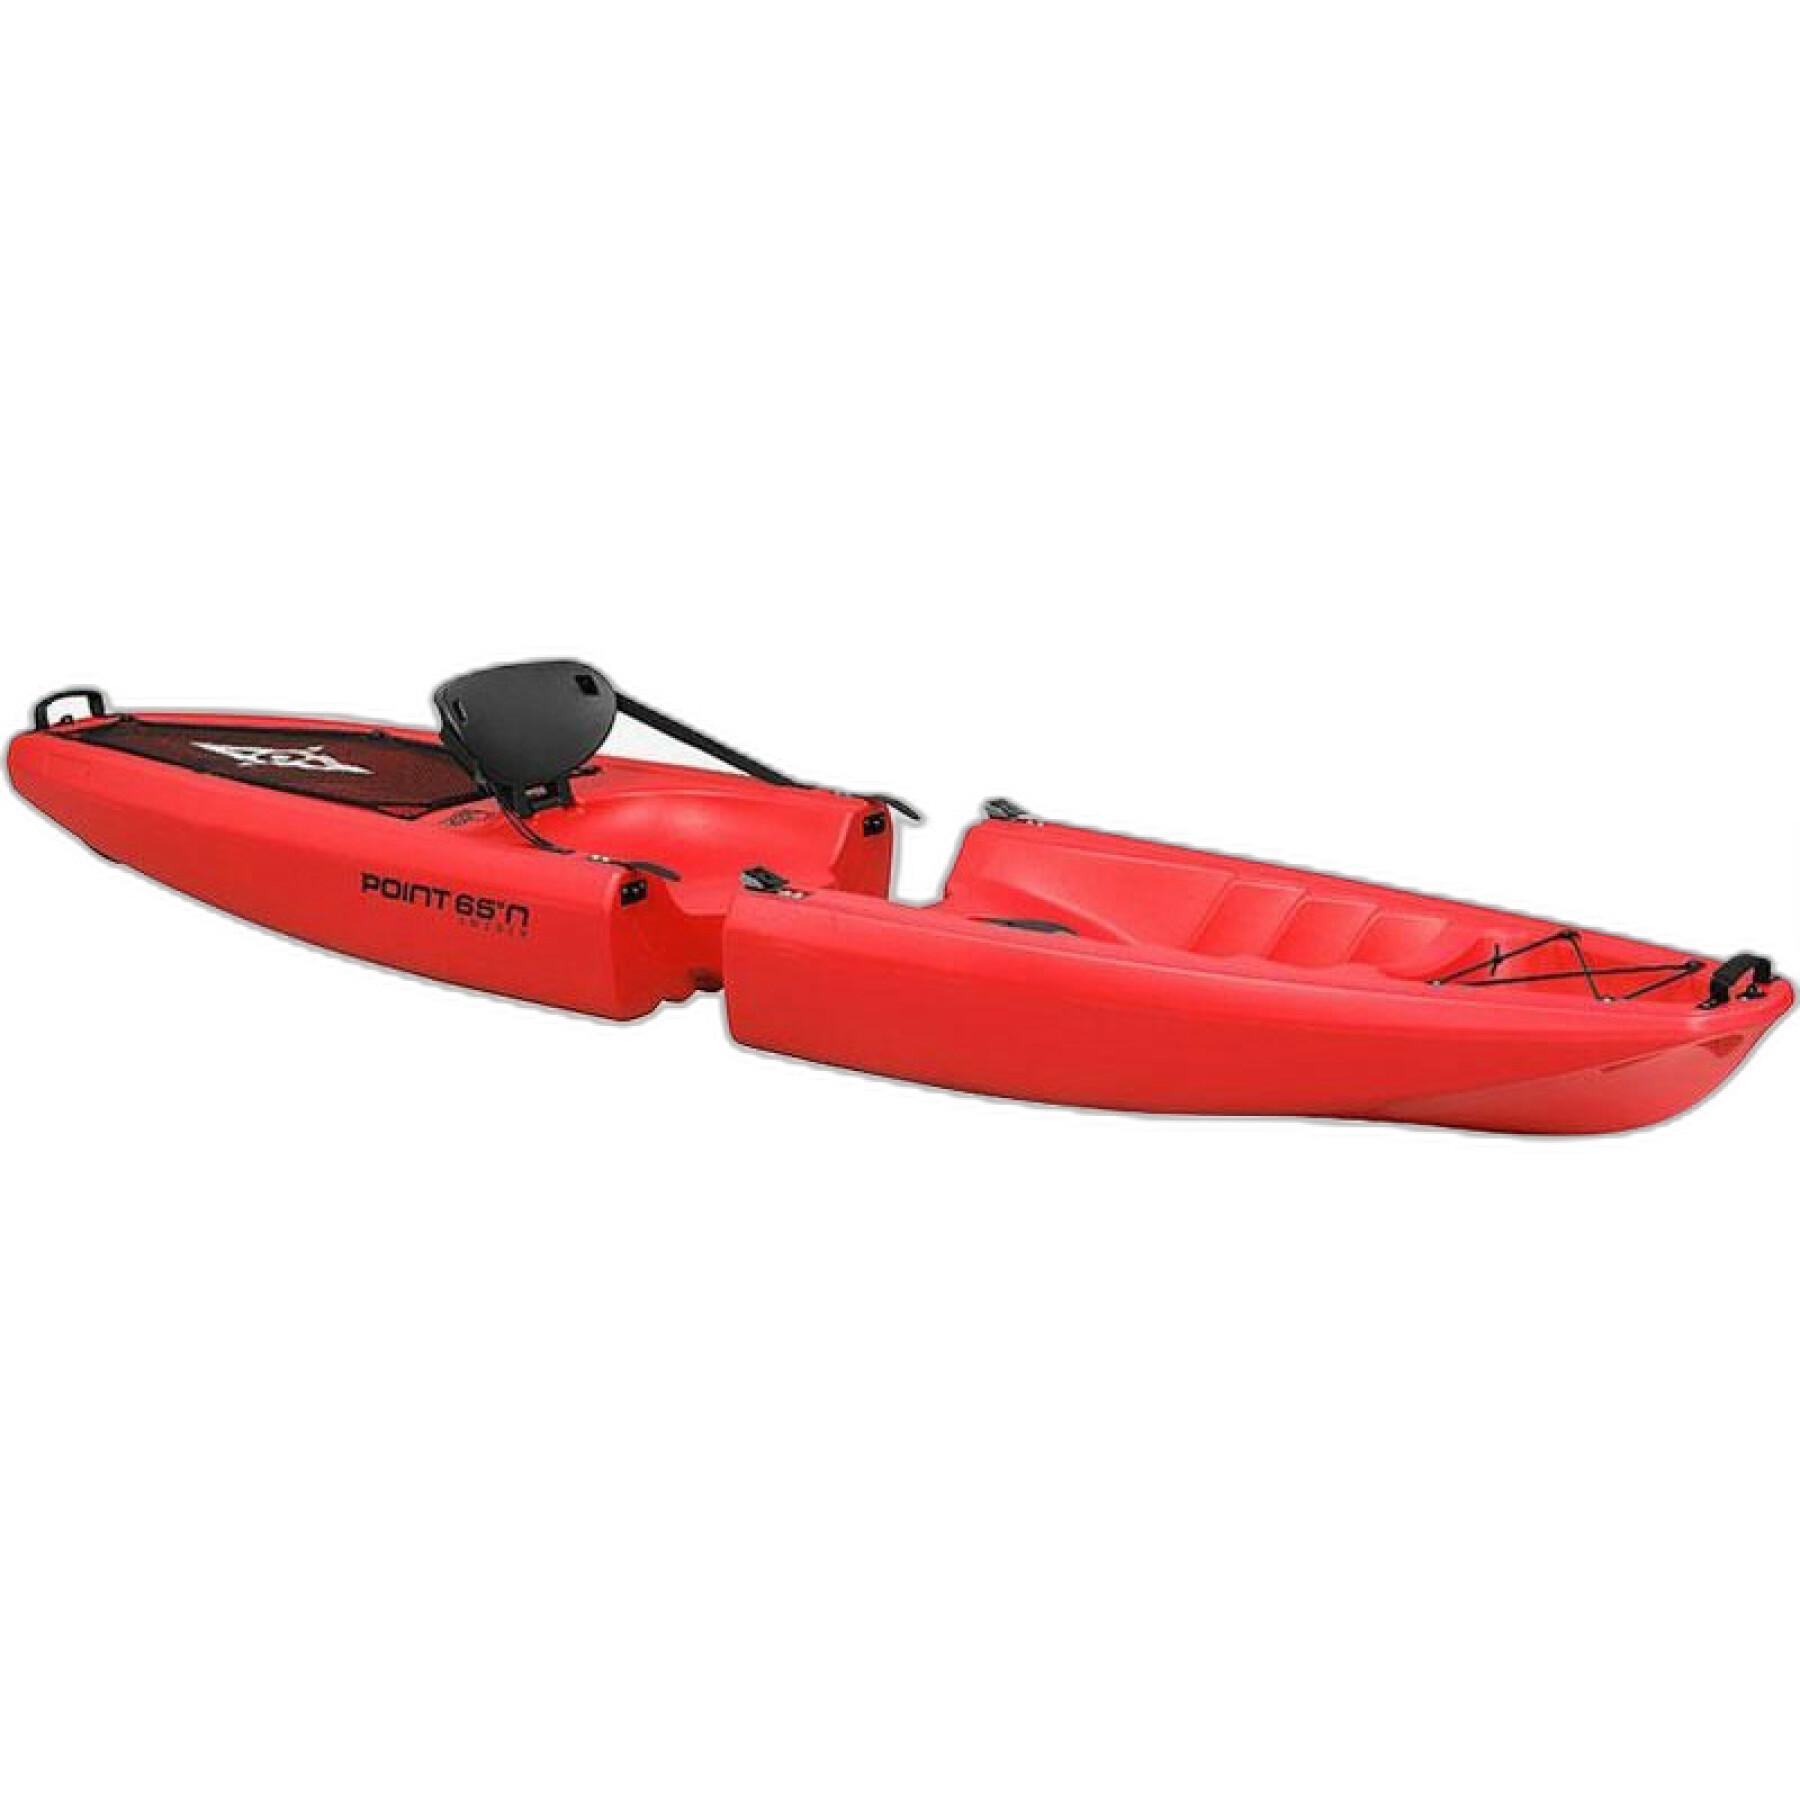 Kayak modulare Point 65°N sit-on-top falcon solo